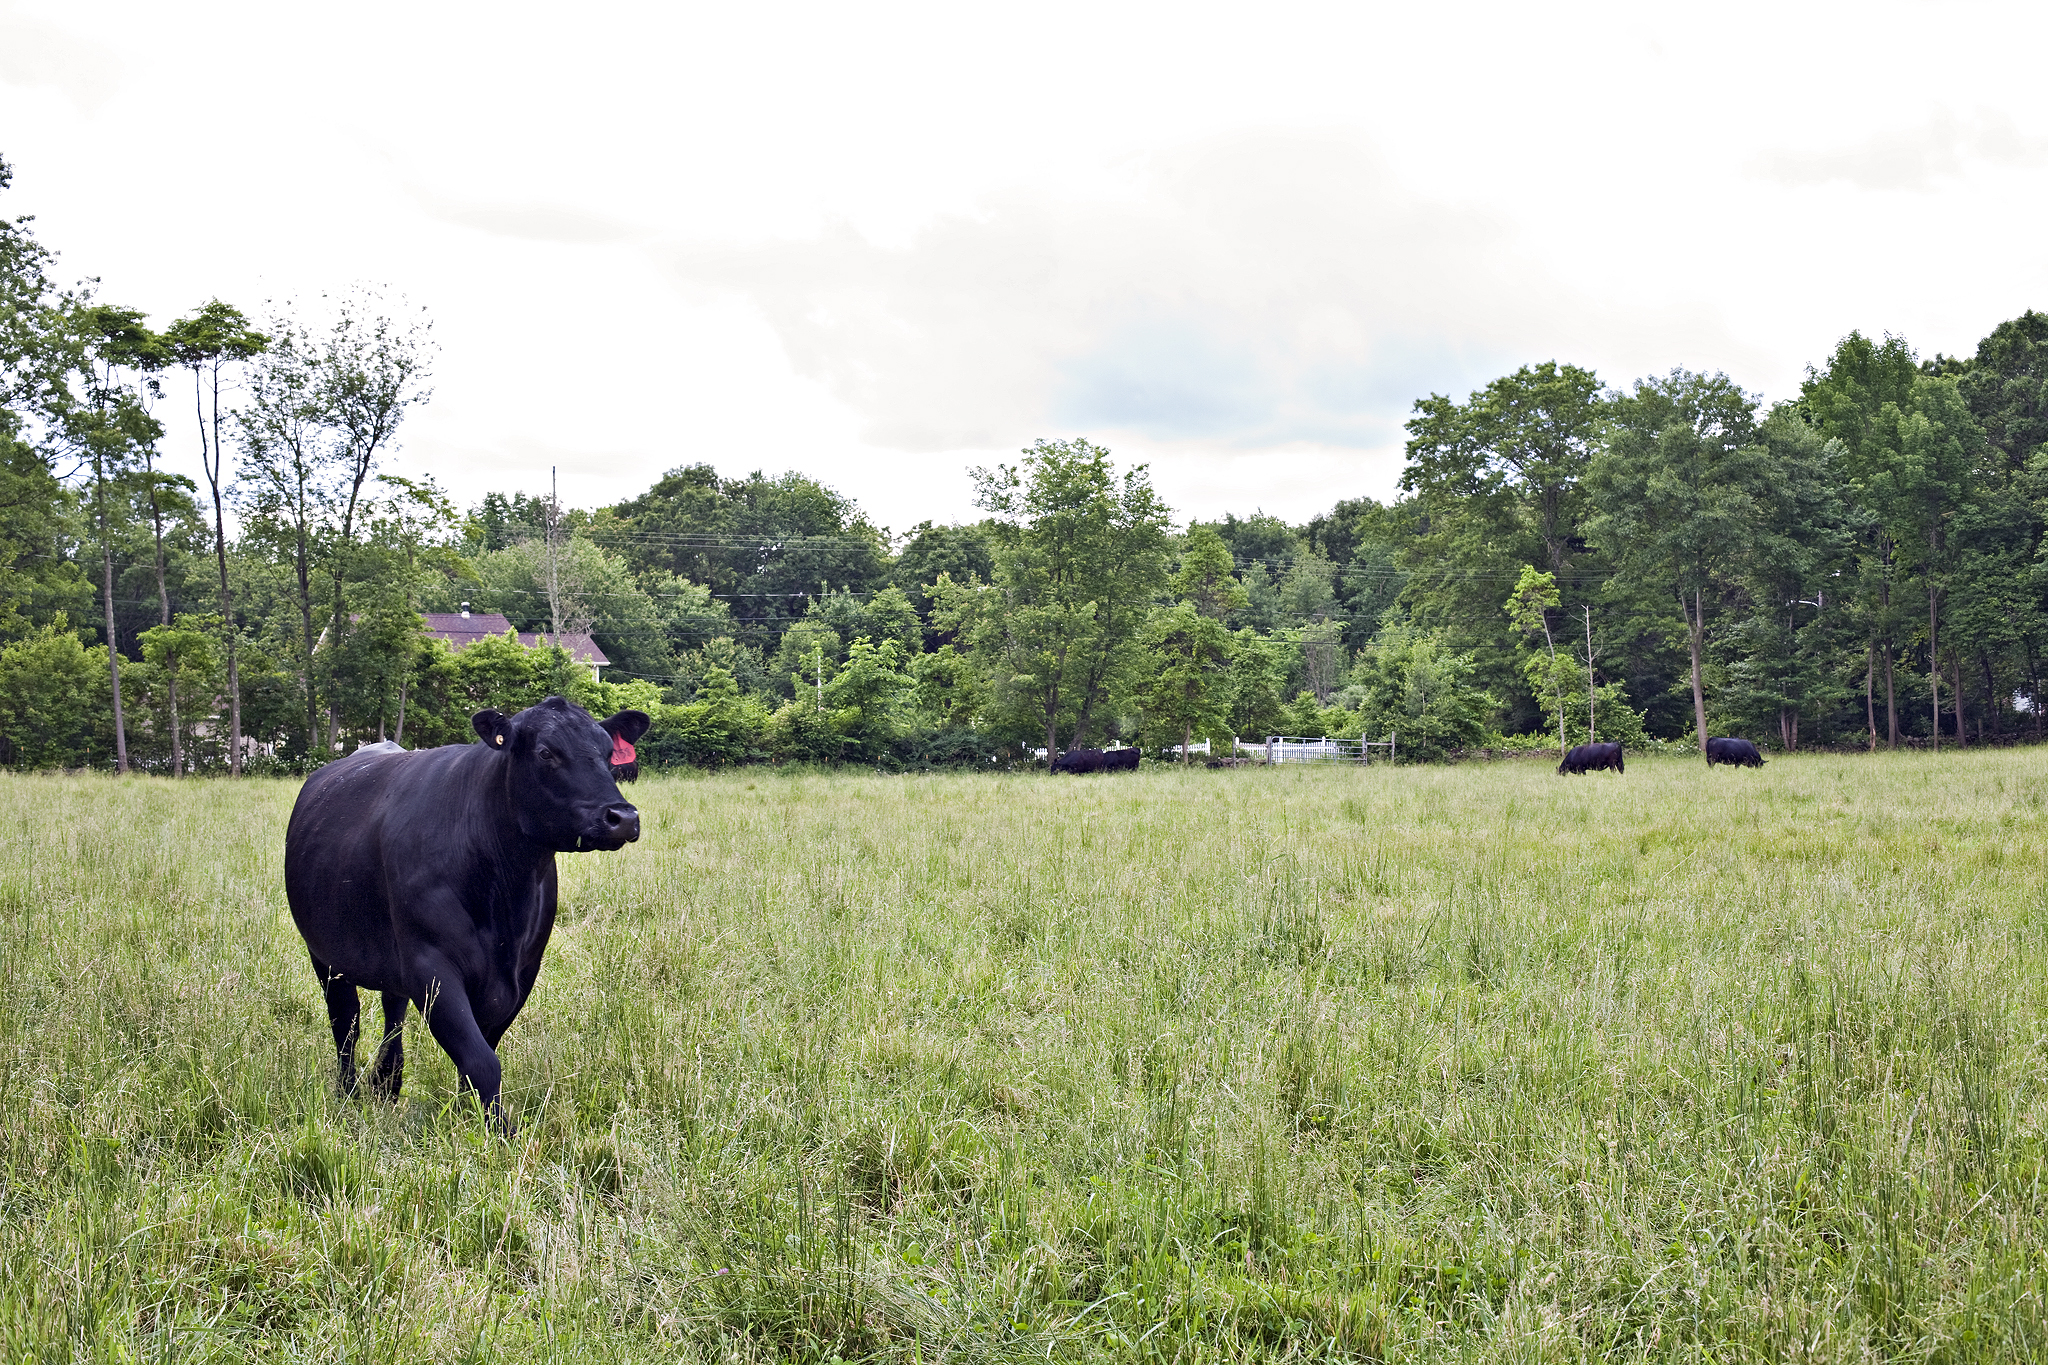 Hello, my name is Brandon Bouthillette and I manage my family’s farm in Smithfield, Rhode Island where we humanely raise antibiotic-free, no-added-hormones, pedigreed 100% Black Angus cattle and 100% American Heritage Berkshire pigs. Please read the rest of my letter to you.